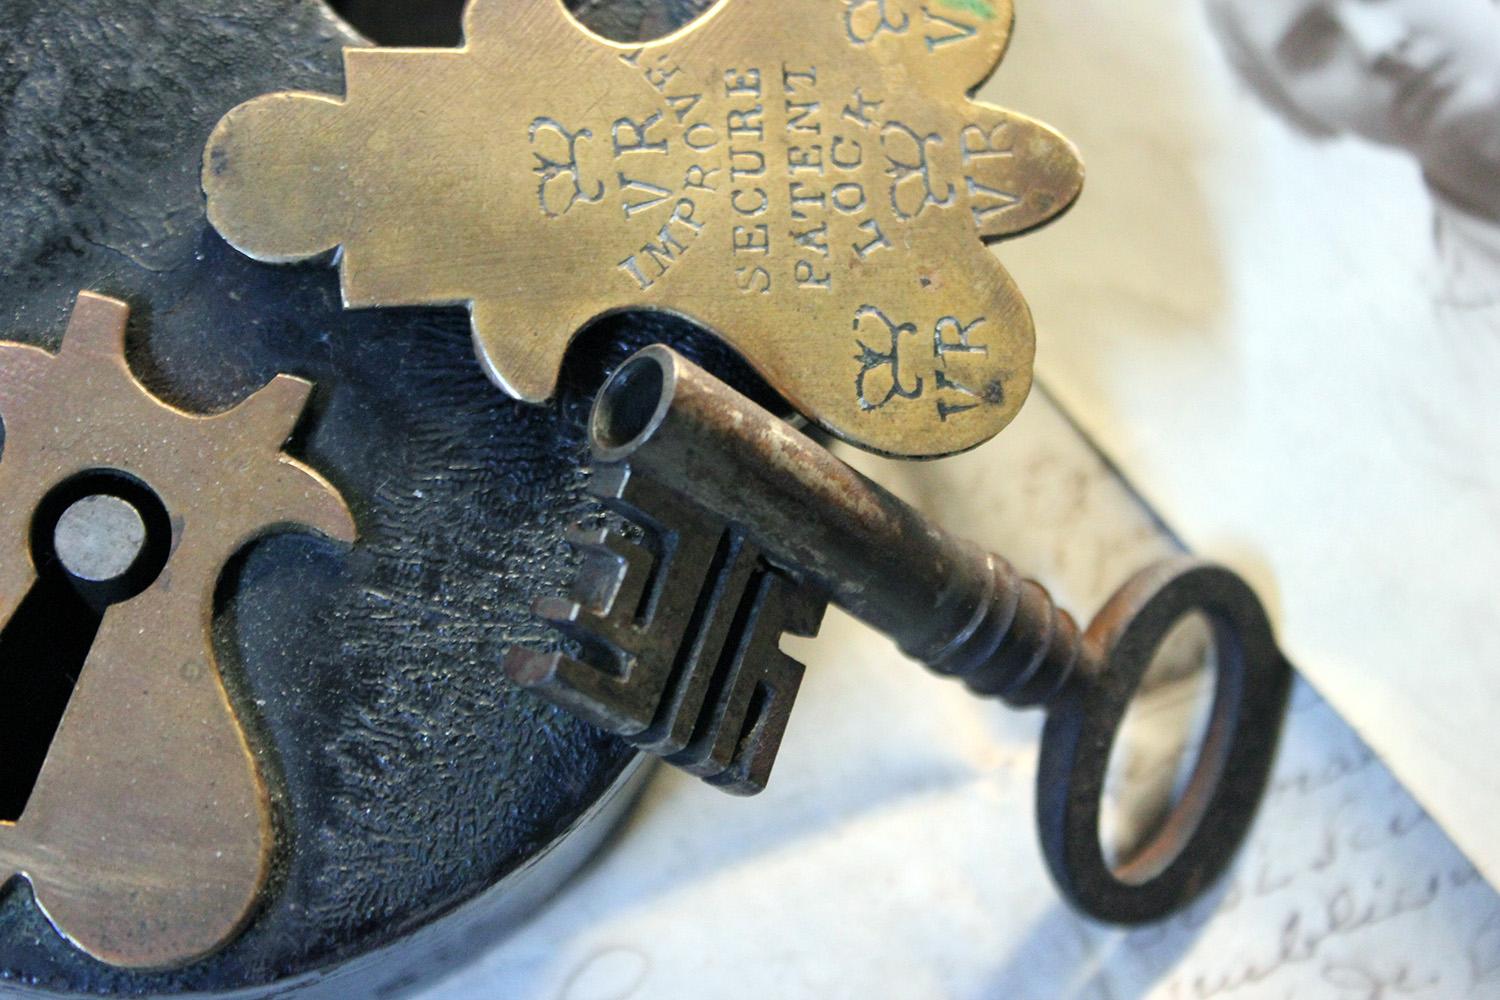 Having an iron case and shackle with brass escutcheon and cover, stamped ‘VR improved secure patent lock’, accompanied by the original key and surviving from having been used in a large estate such as a graveyard or school

The condition is very